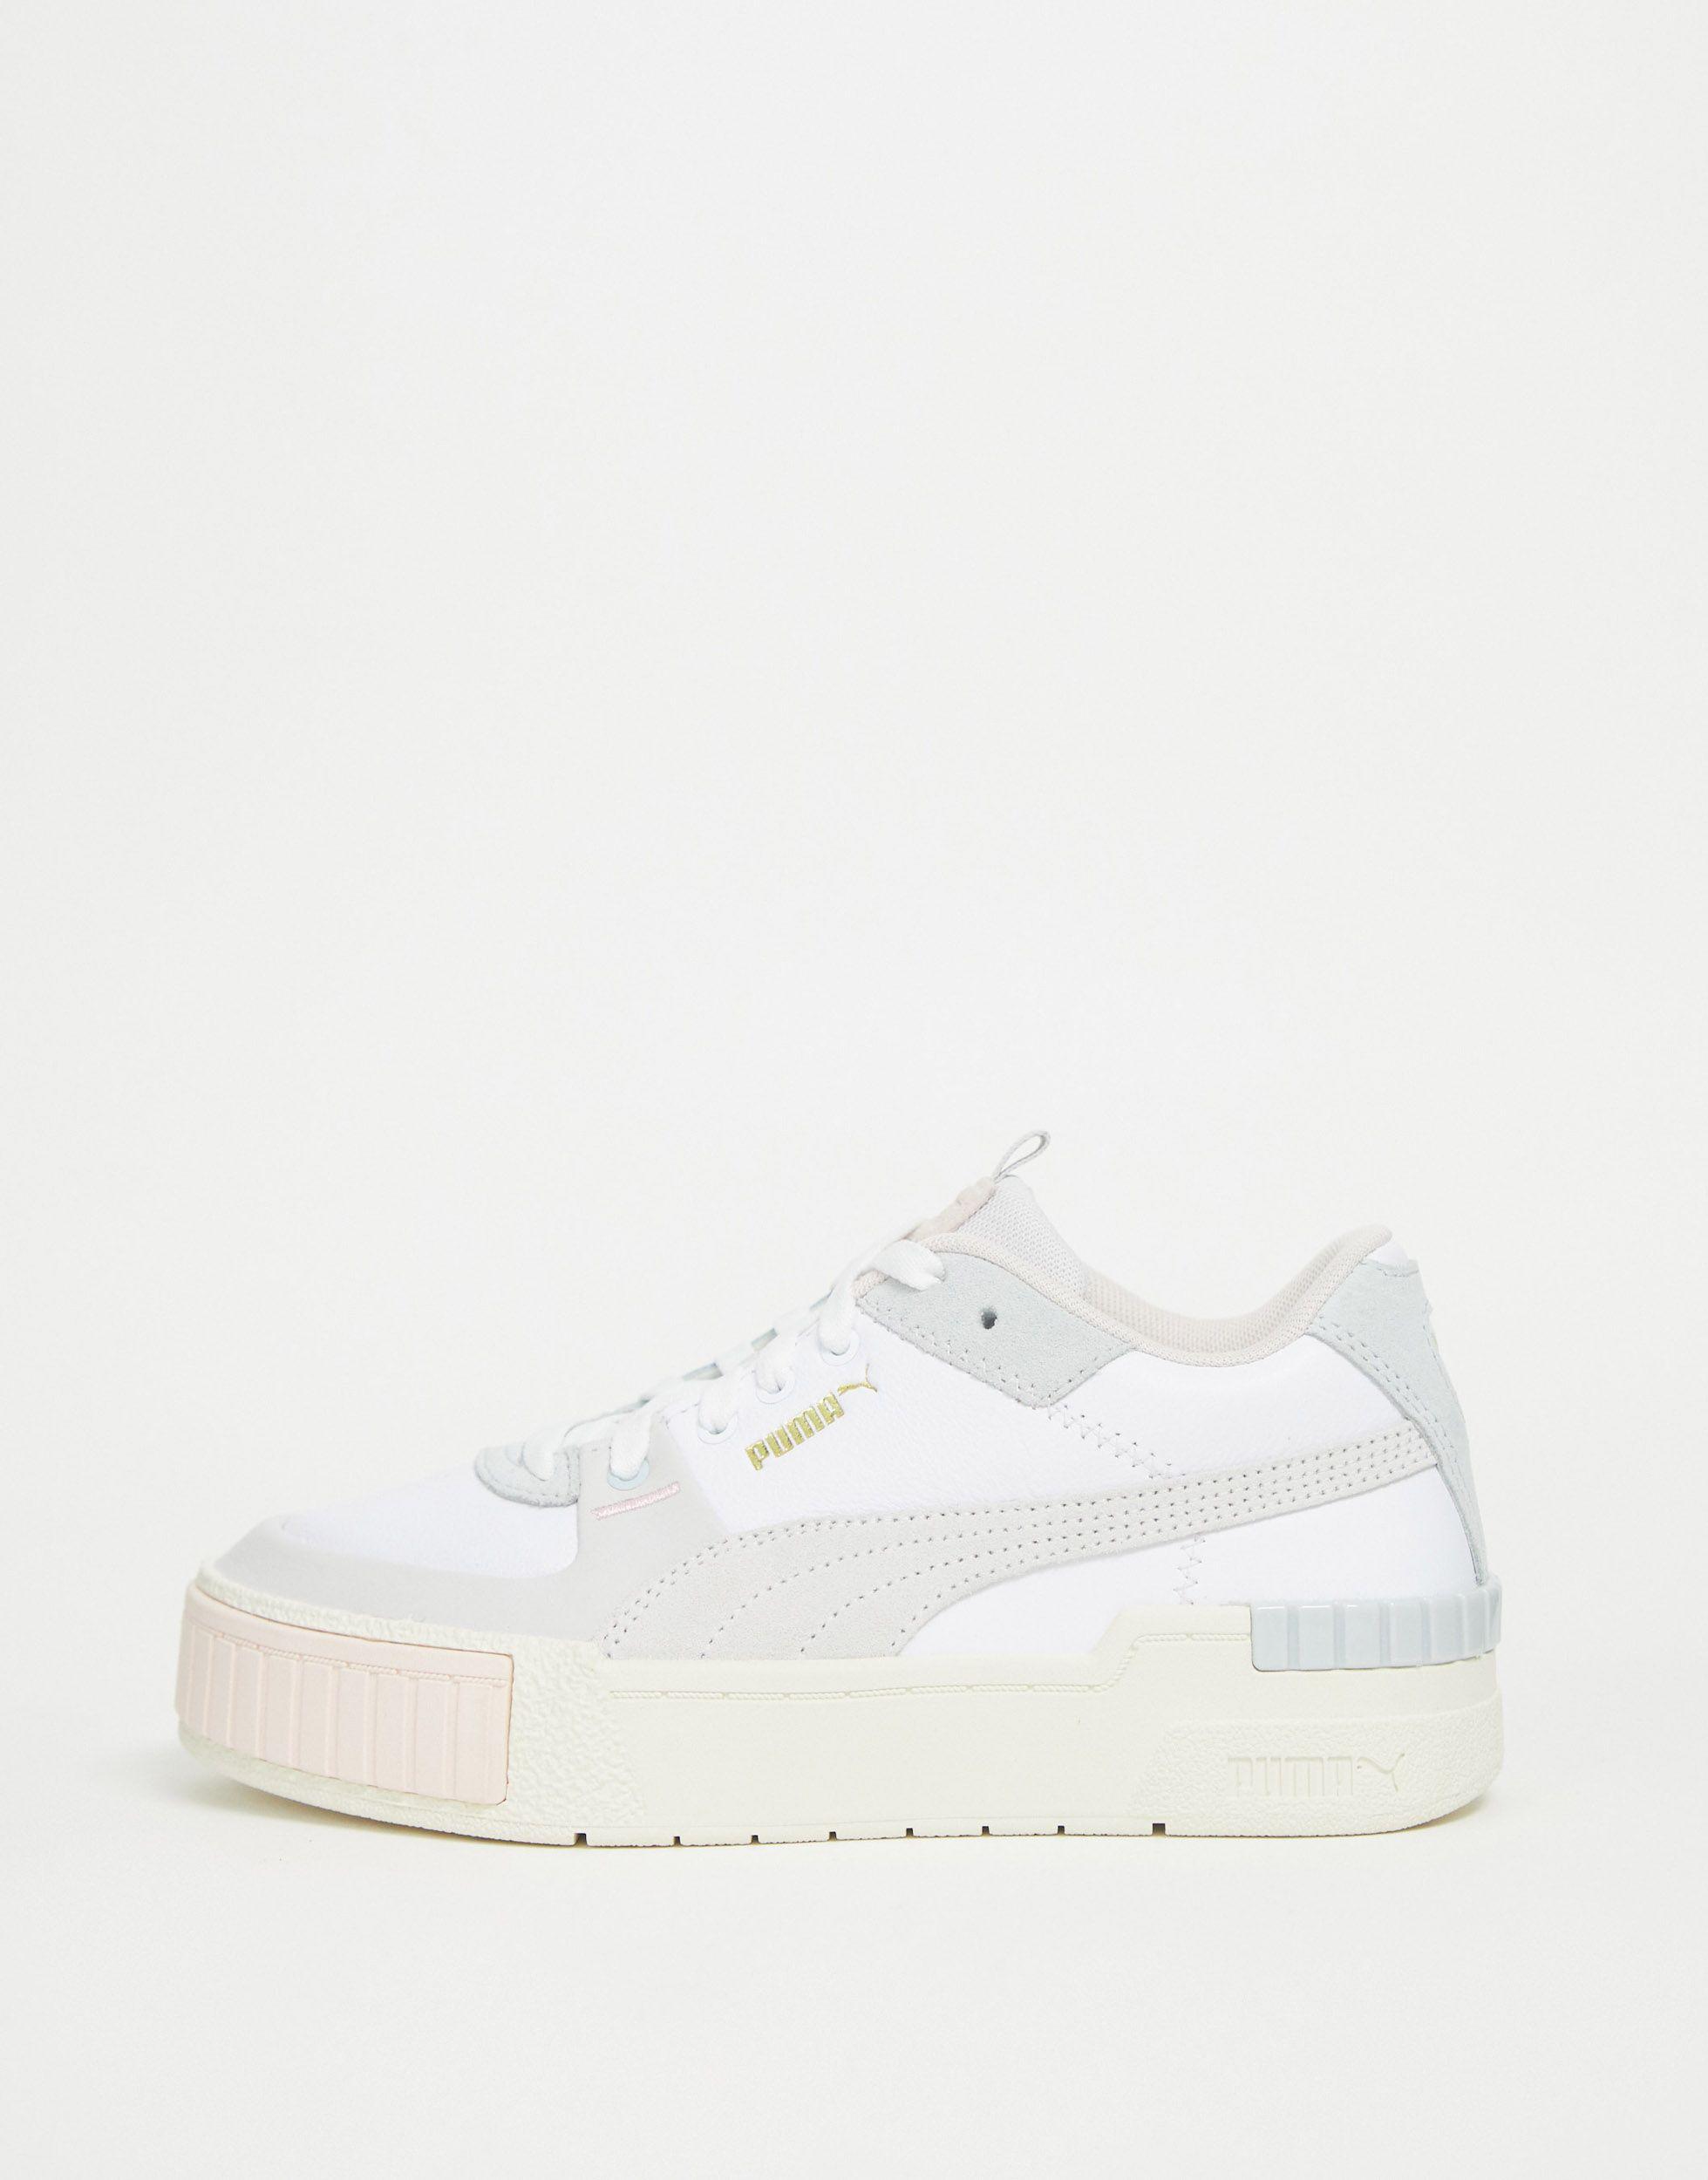 PUMA Leather Cali Sport Chunky Sneakers in White - Lyst